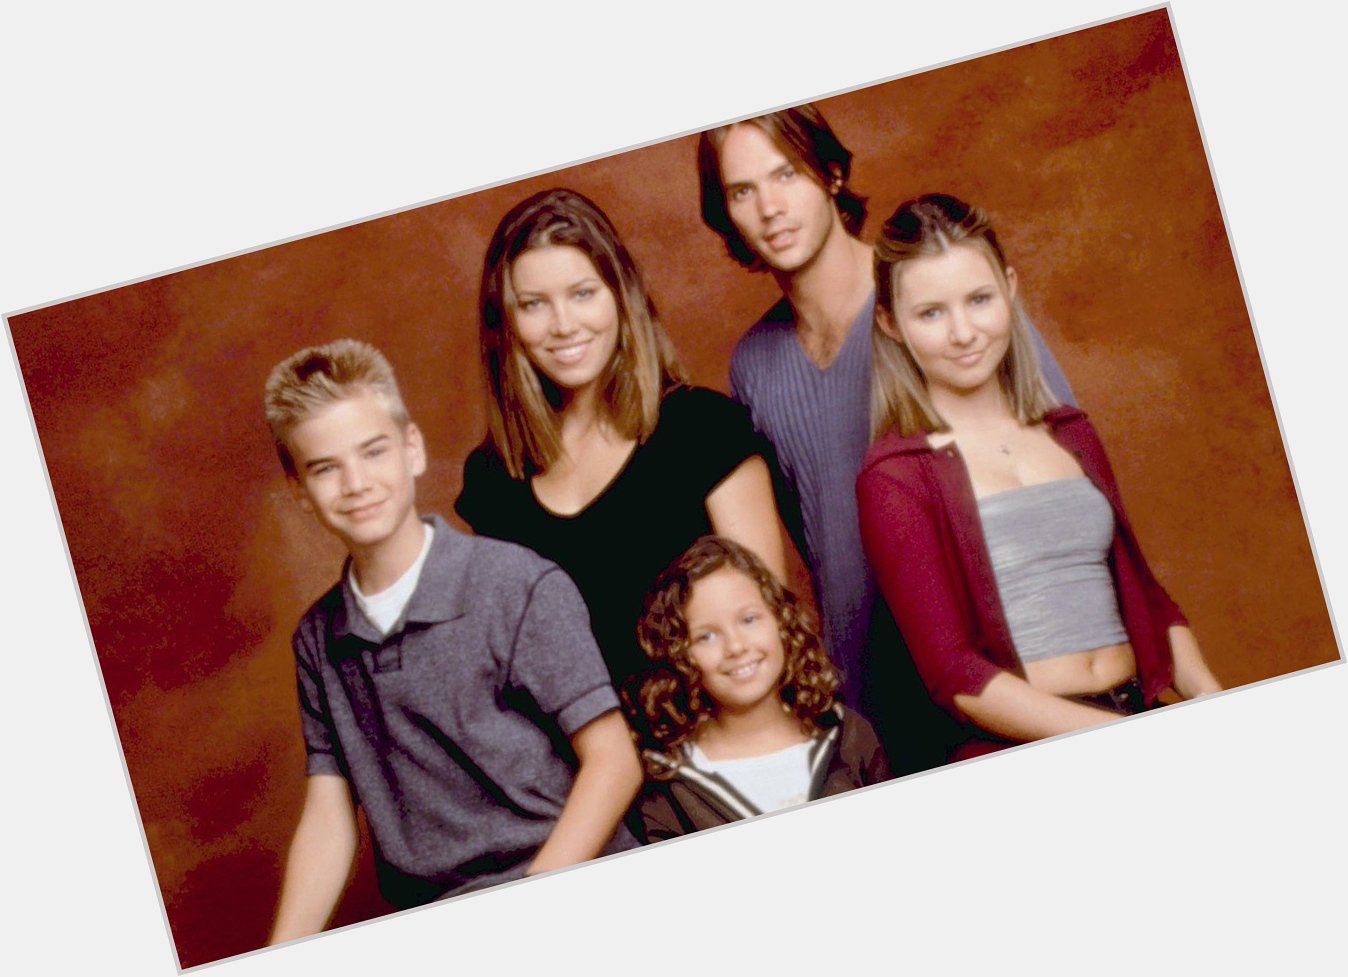 Jessica Biel wishes \7th Heaven\ sister Beverley Mitchell a happy birthday - see the pic  